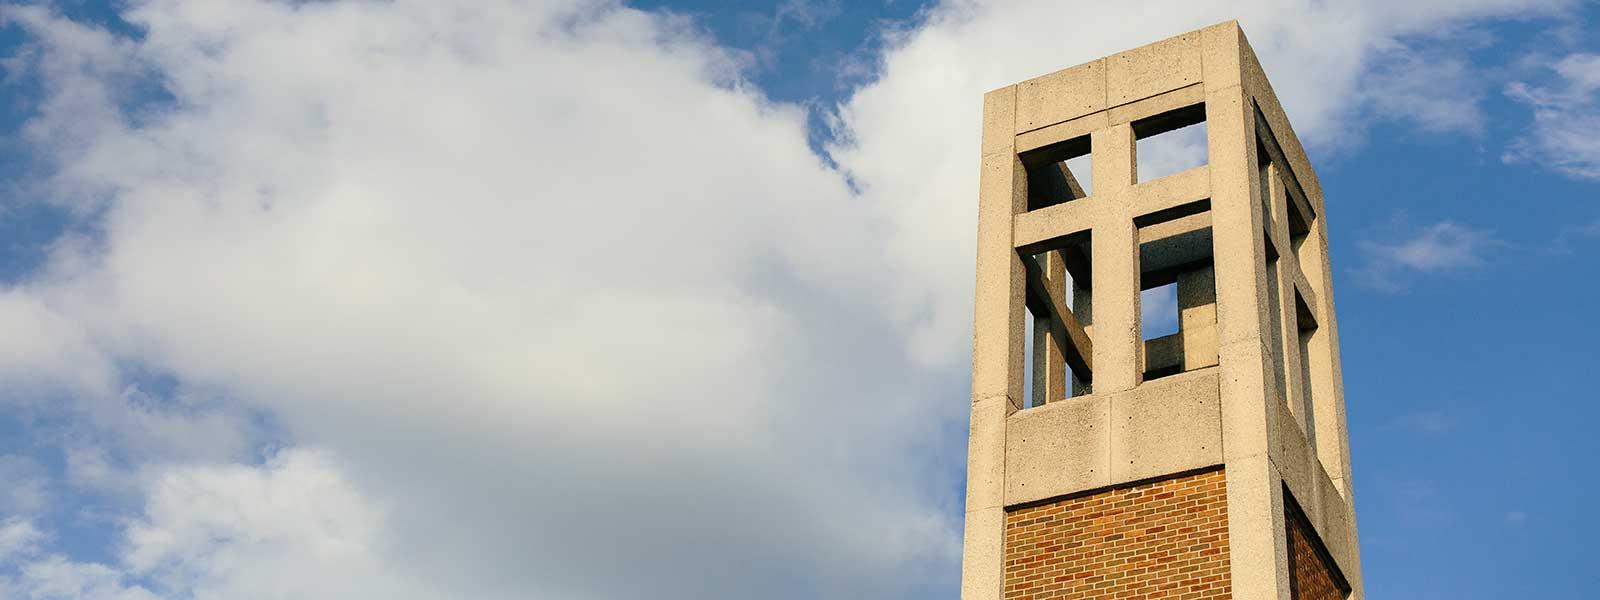 bell tower against blue cloudy sky